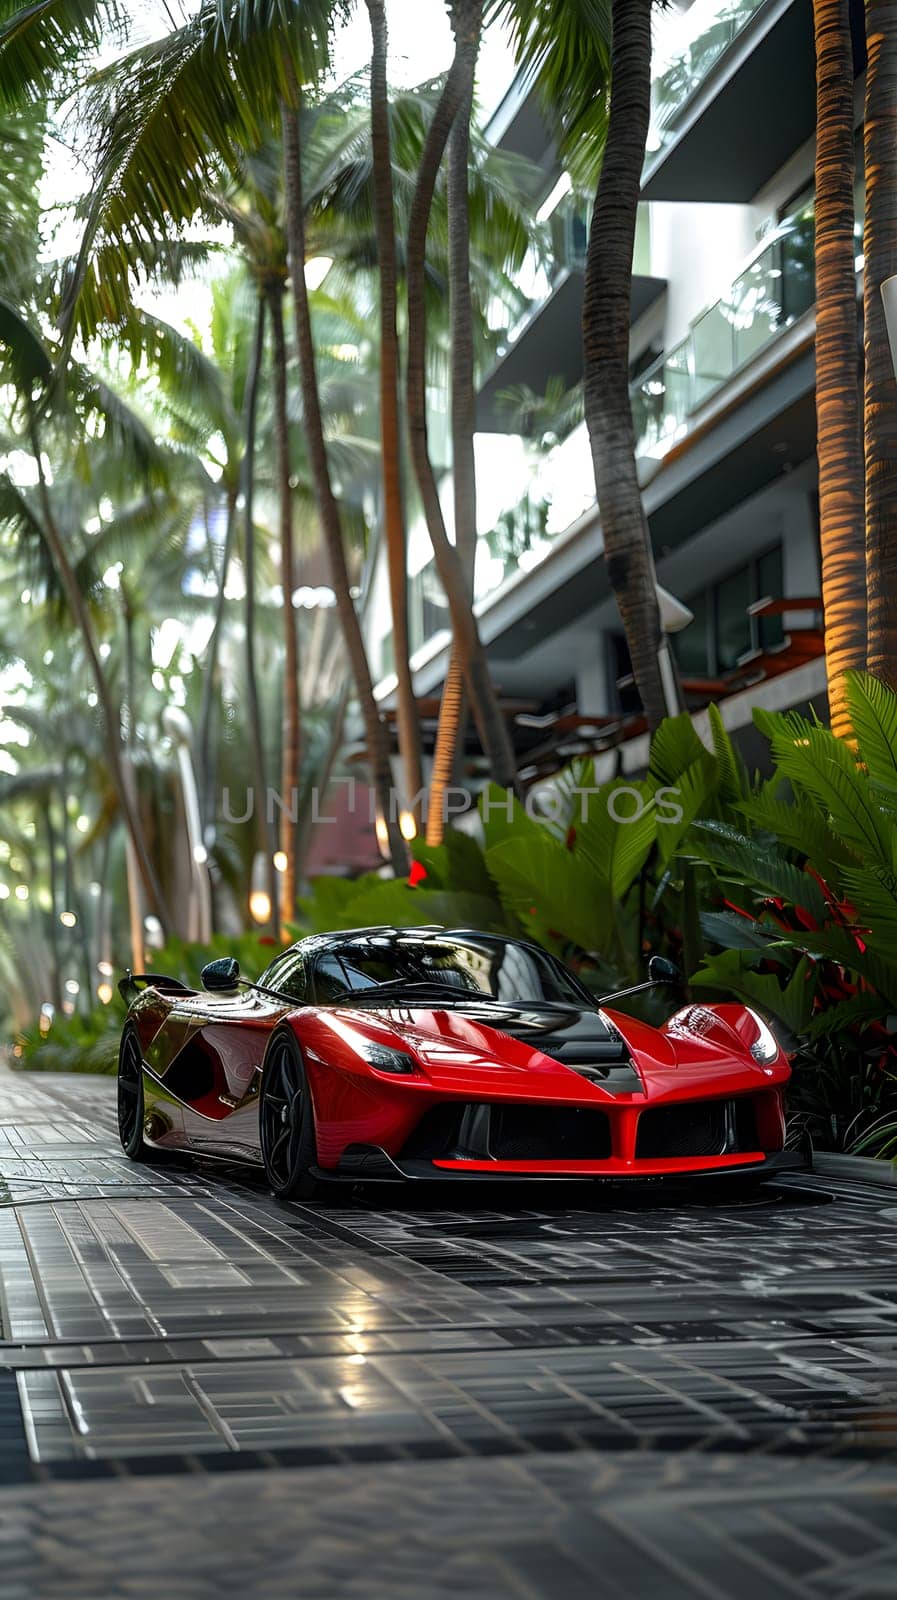 A vibrant red car with sleek automotive design and shiny tires is parked in front of a building, illuminated by automotive lighting, on a smooth asphalt surface lined with palm trees